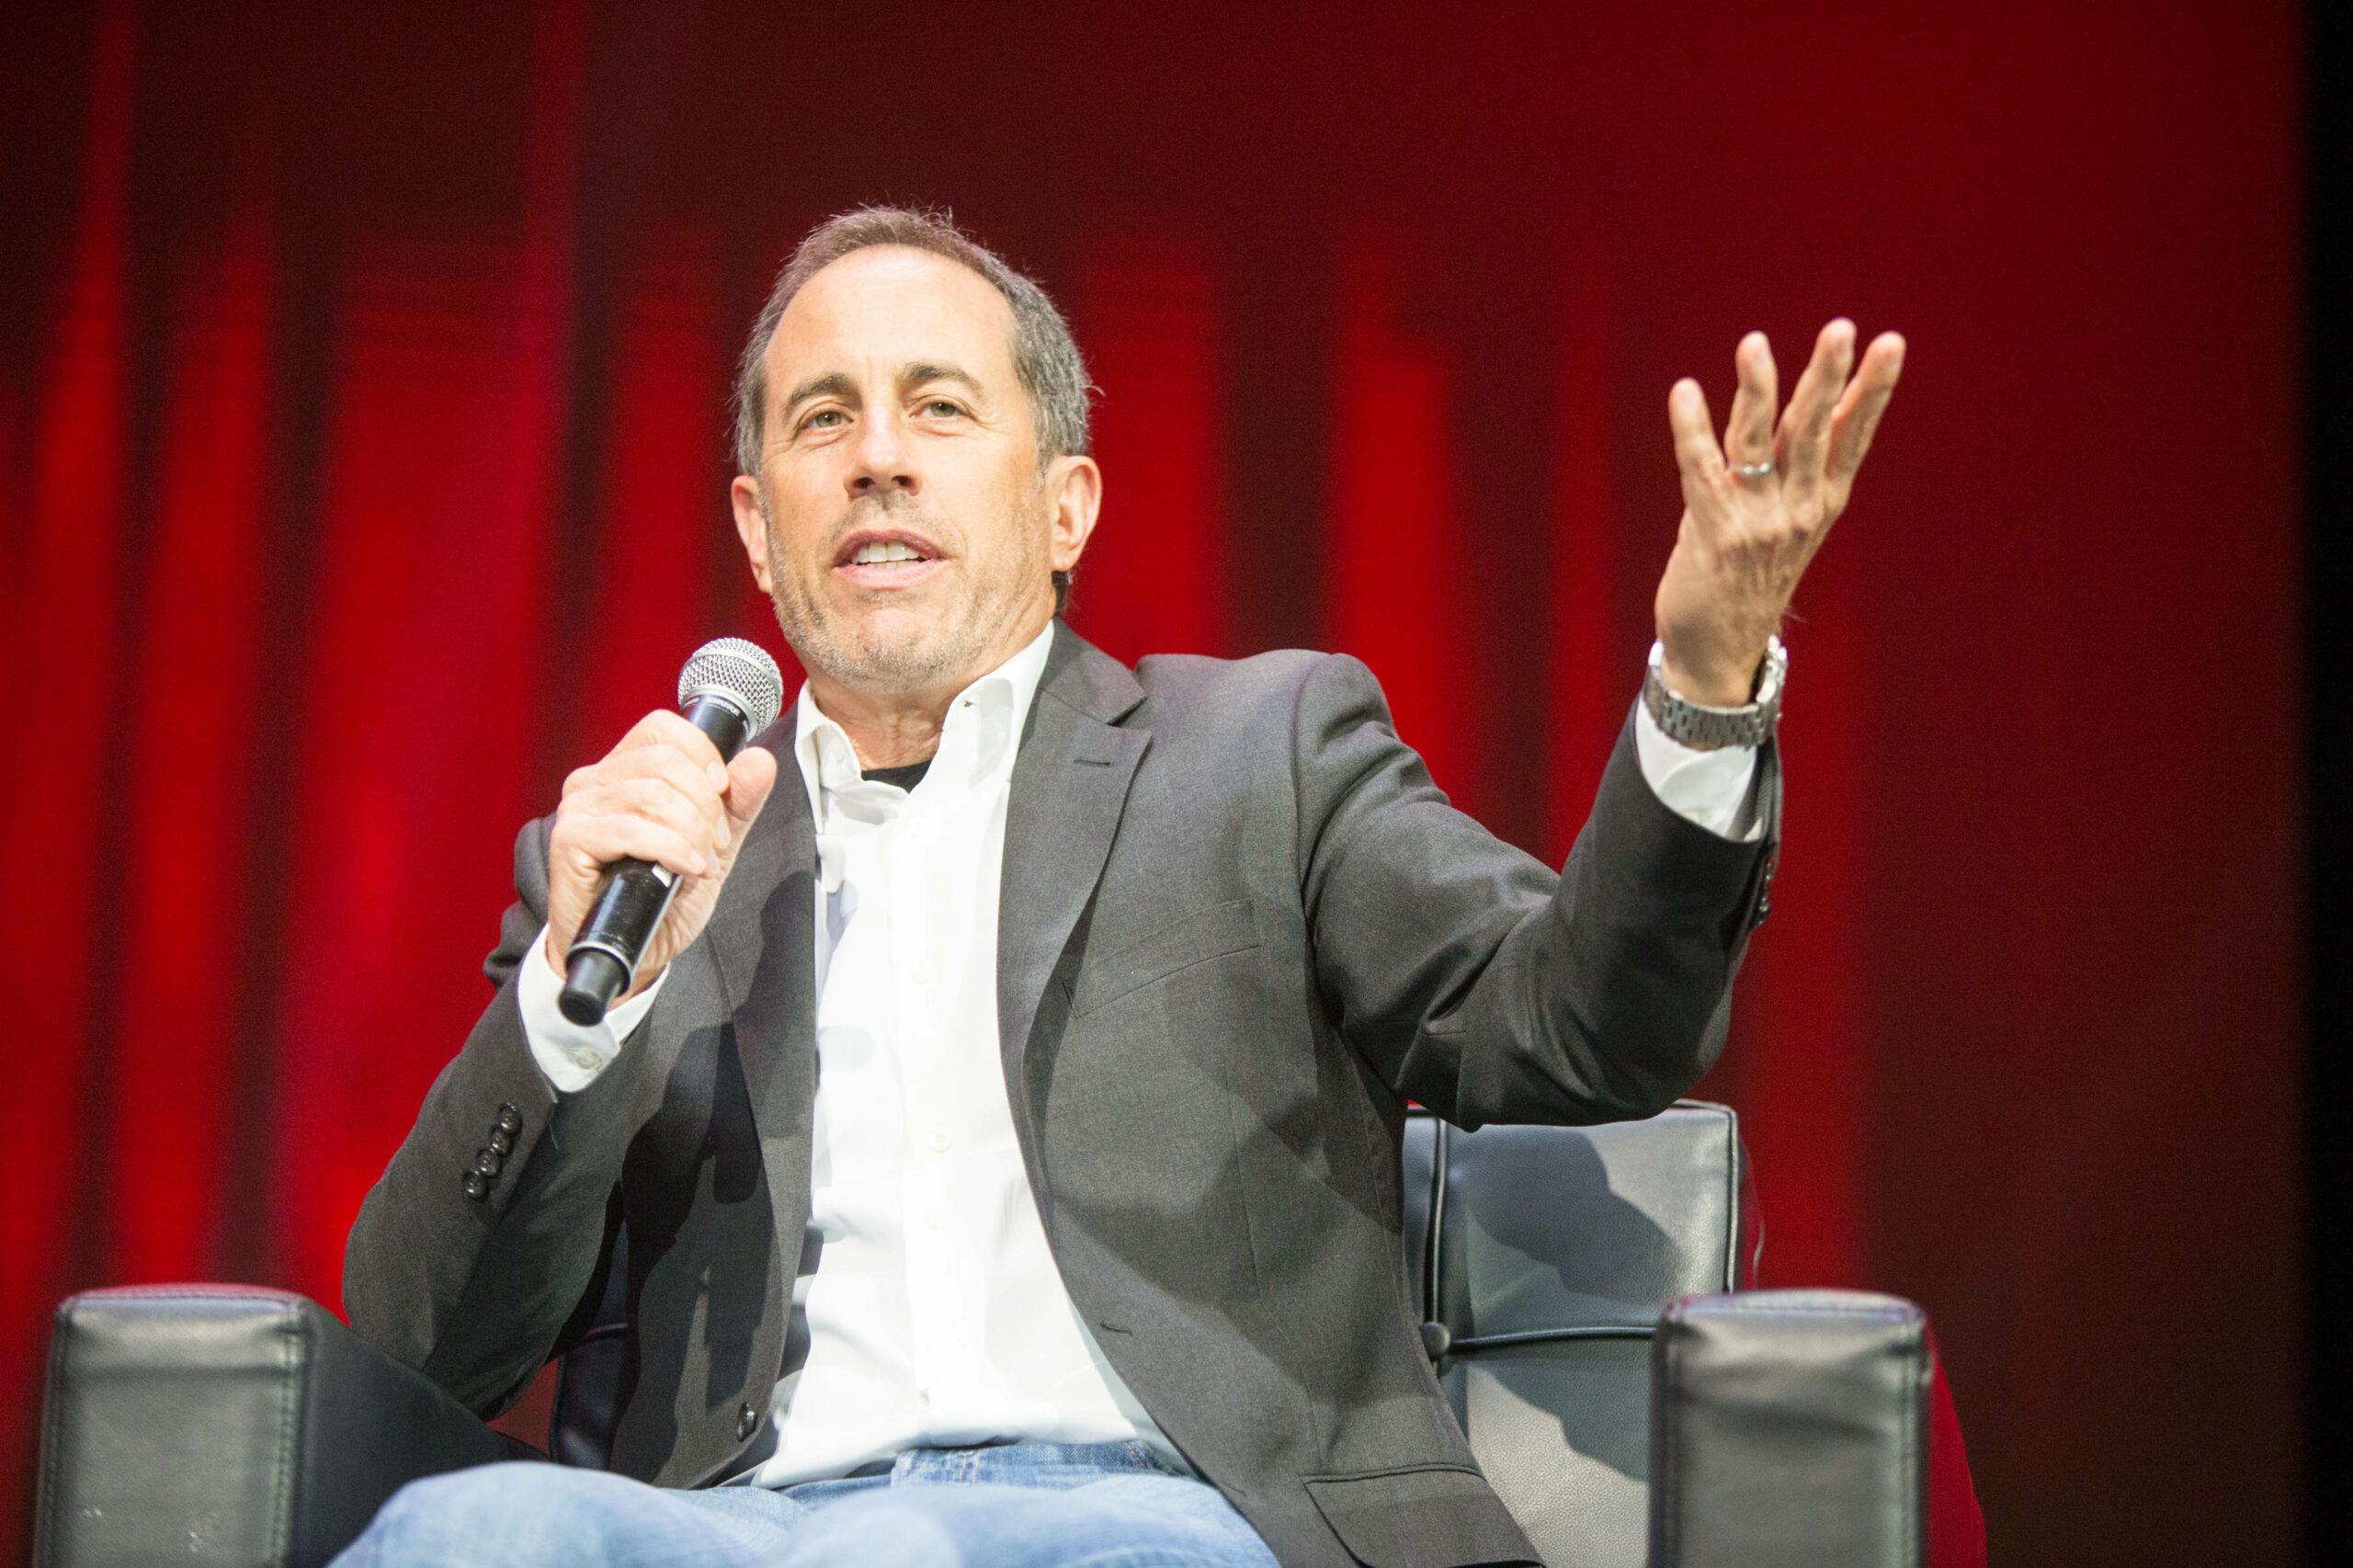 Jerry Seinfeld at Comedy Central's Clusterfest - Sunday